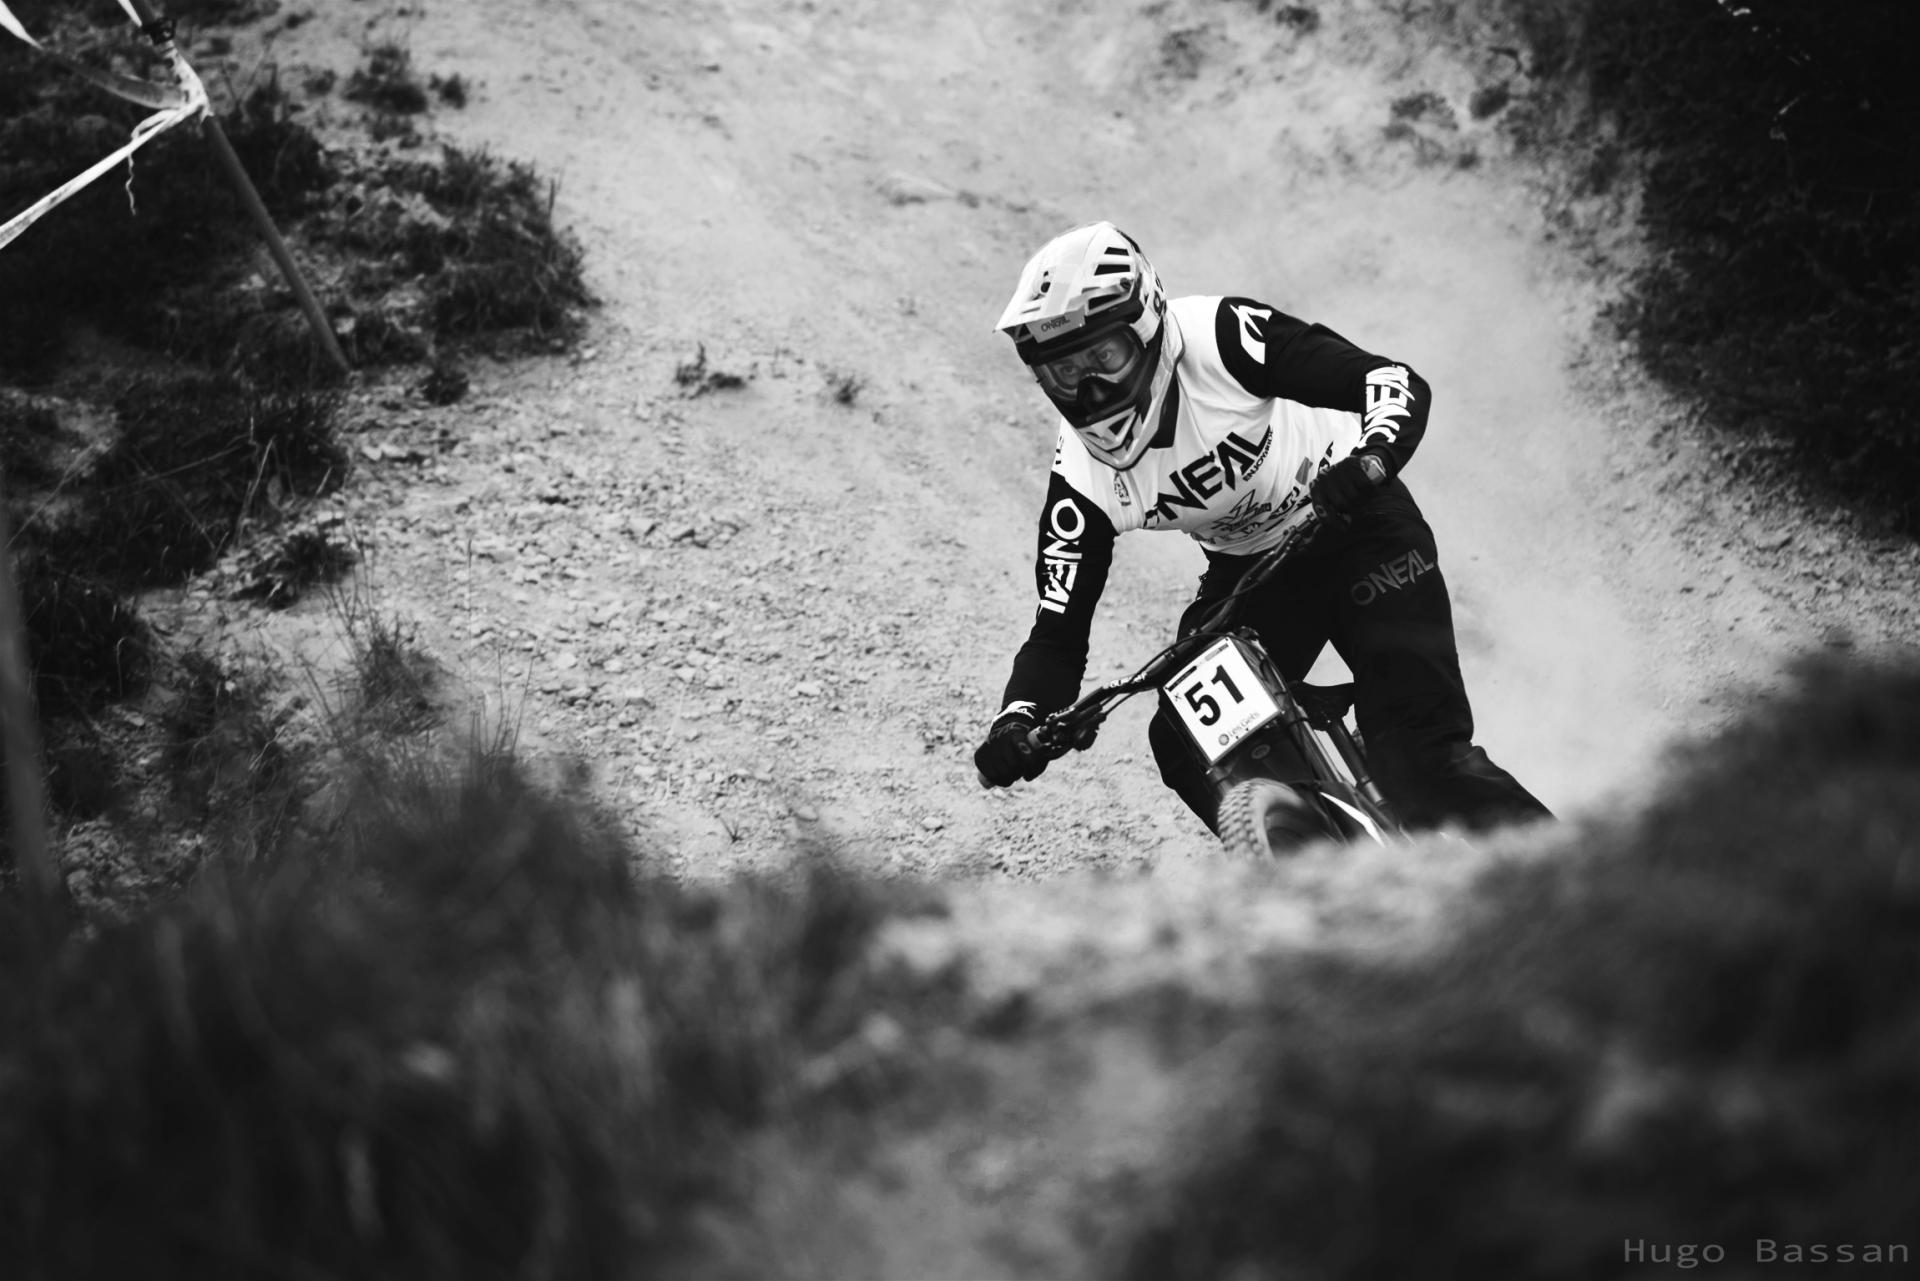 World Cup UCI MTB Les Gets 2019